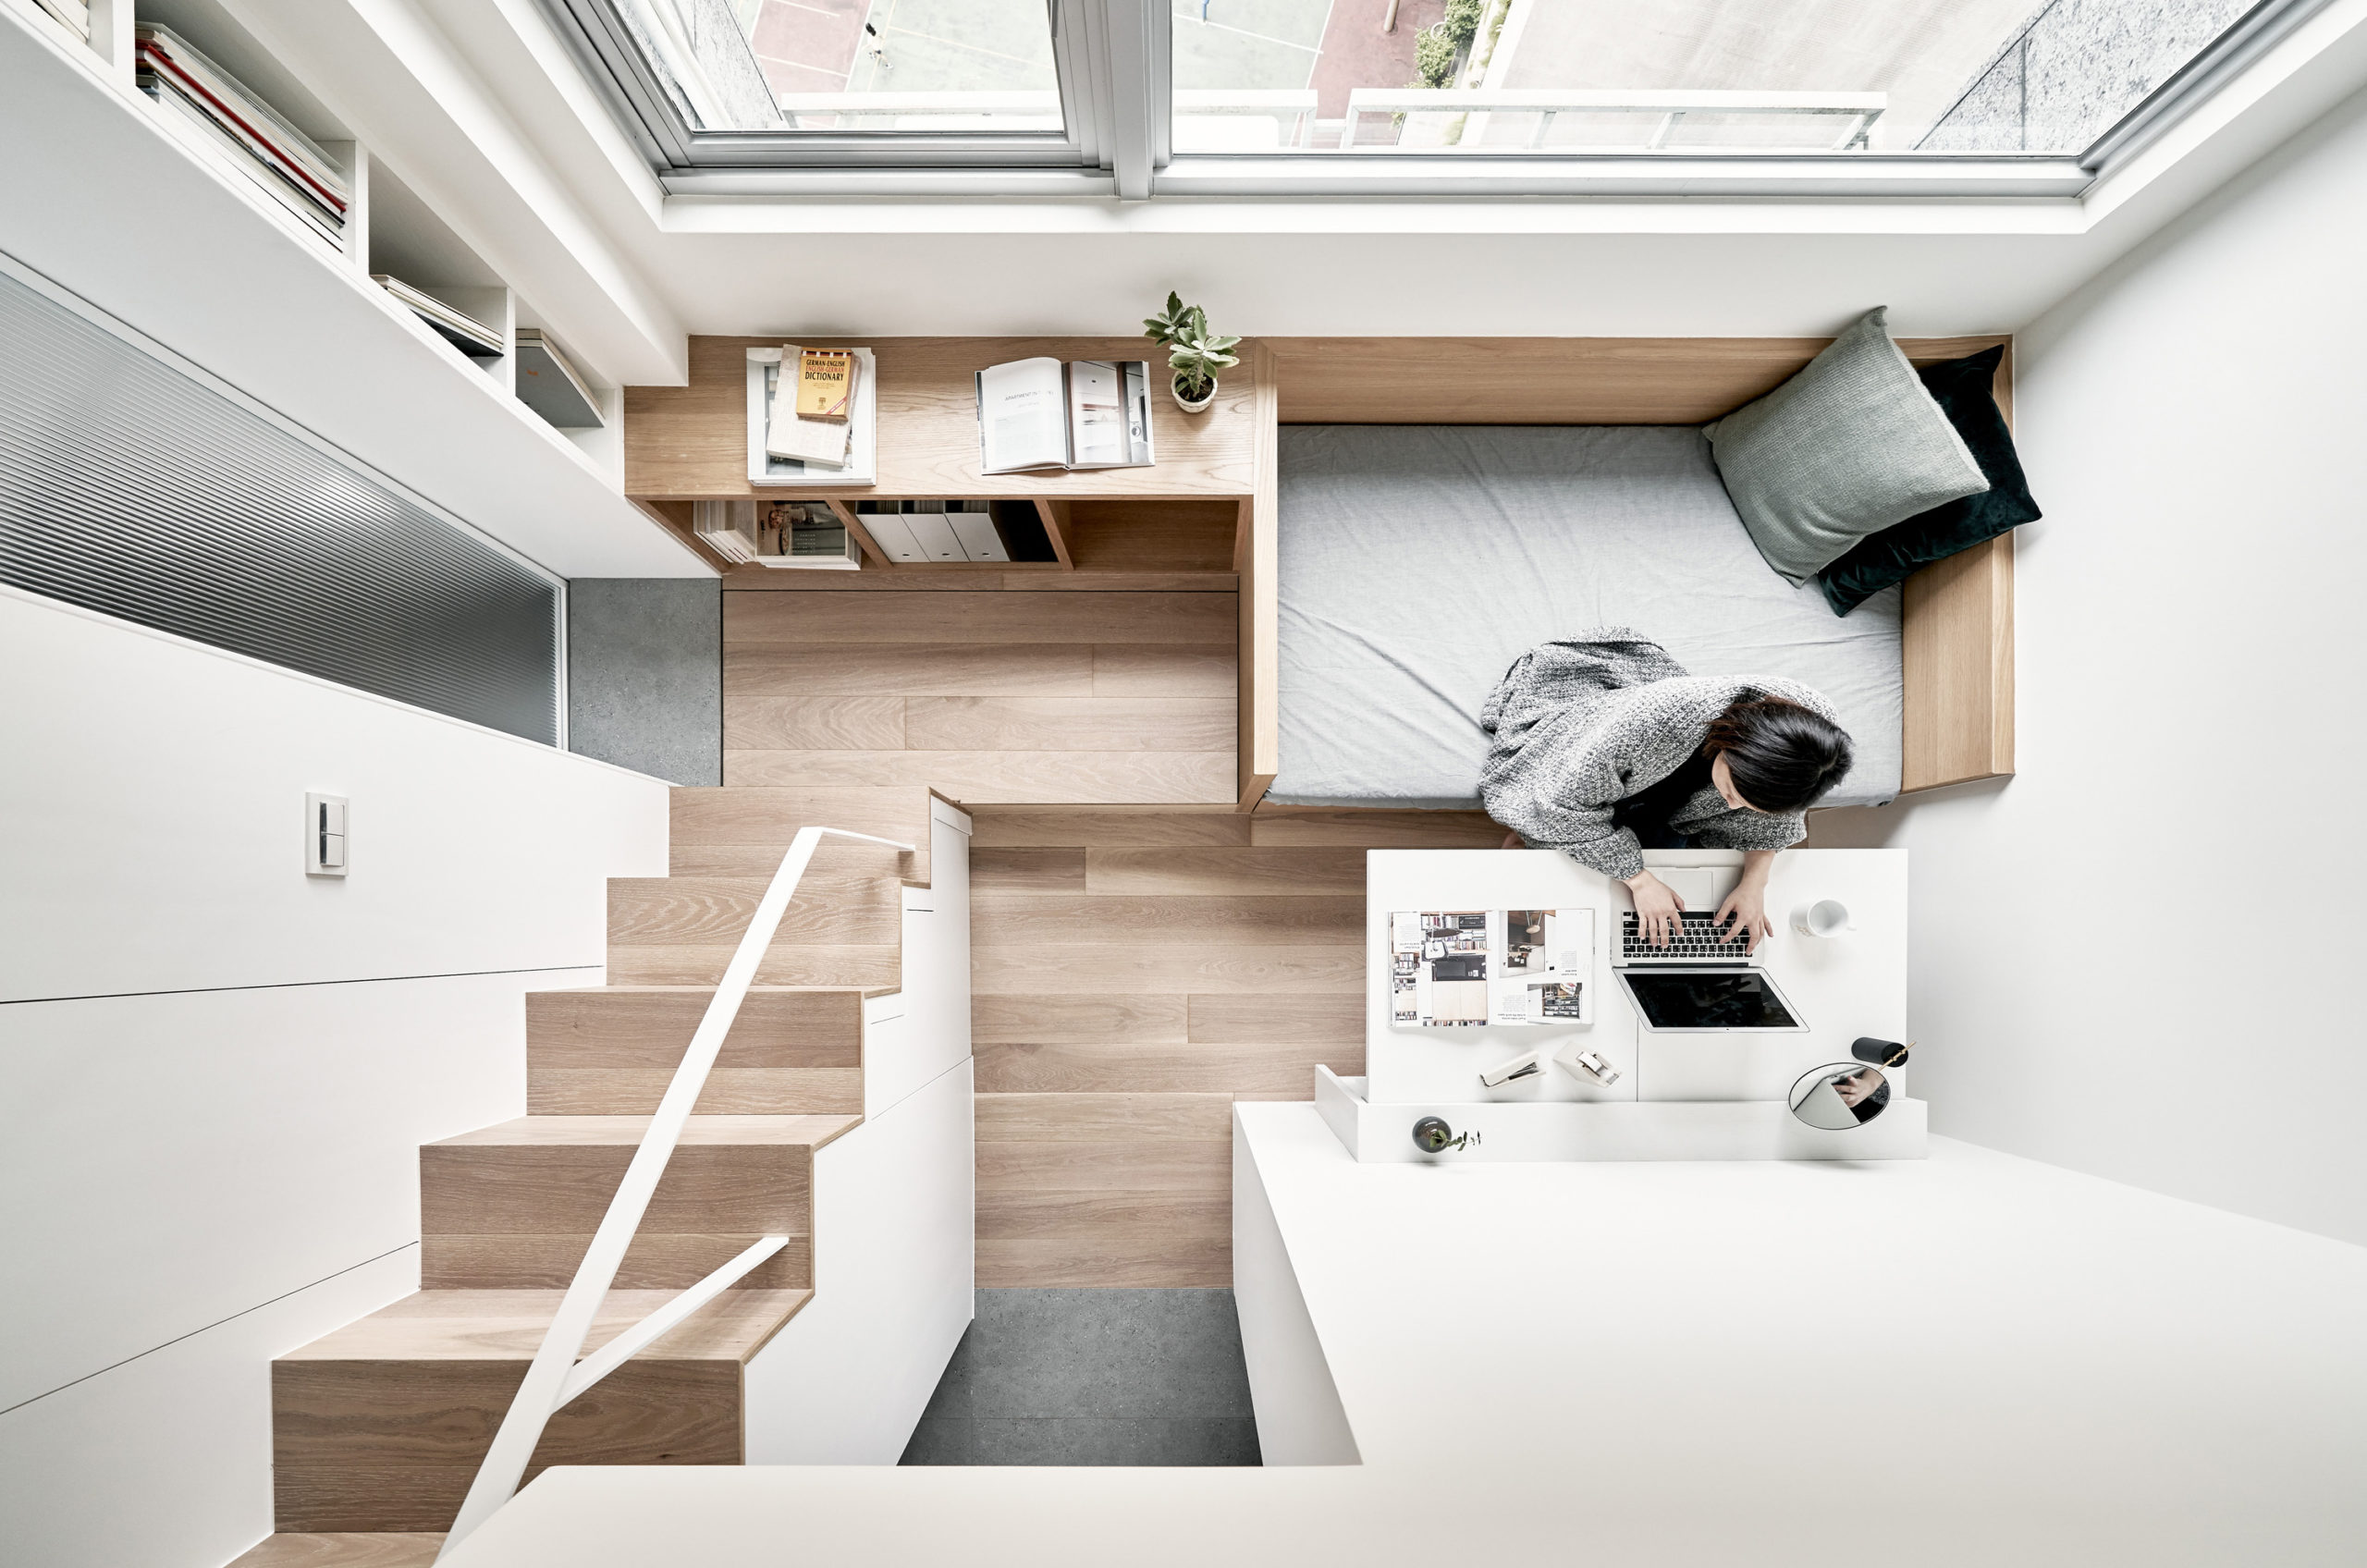 https://blog.architizer.com/wp-content/uploads/17.6-square-meter-Apartment-by-A-Little-Design-scaled.jpg